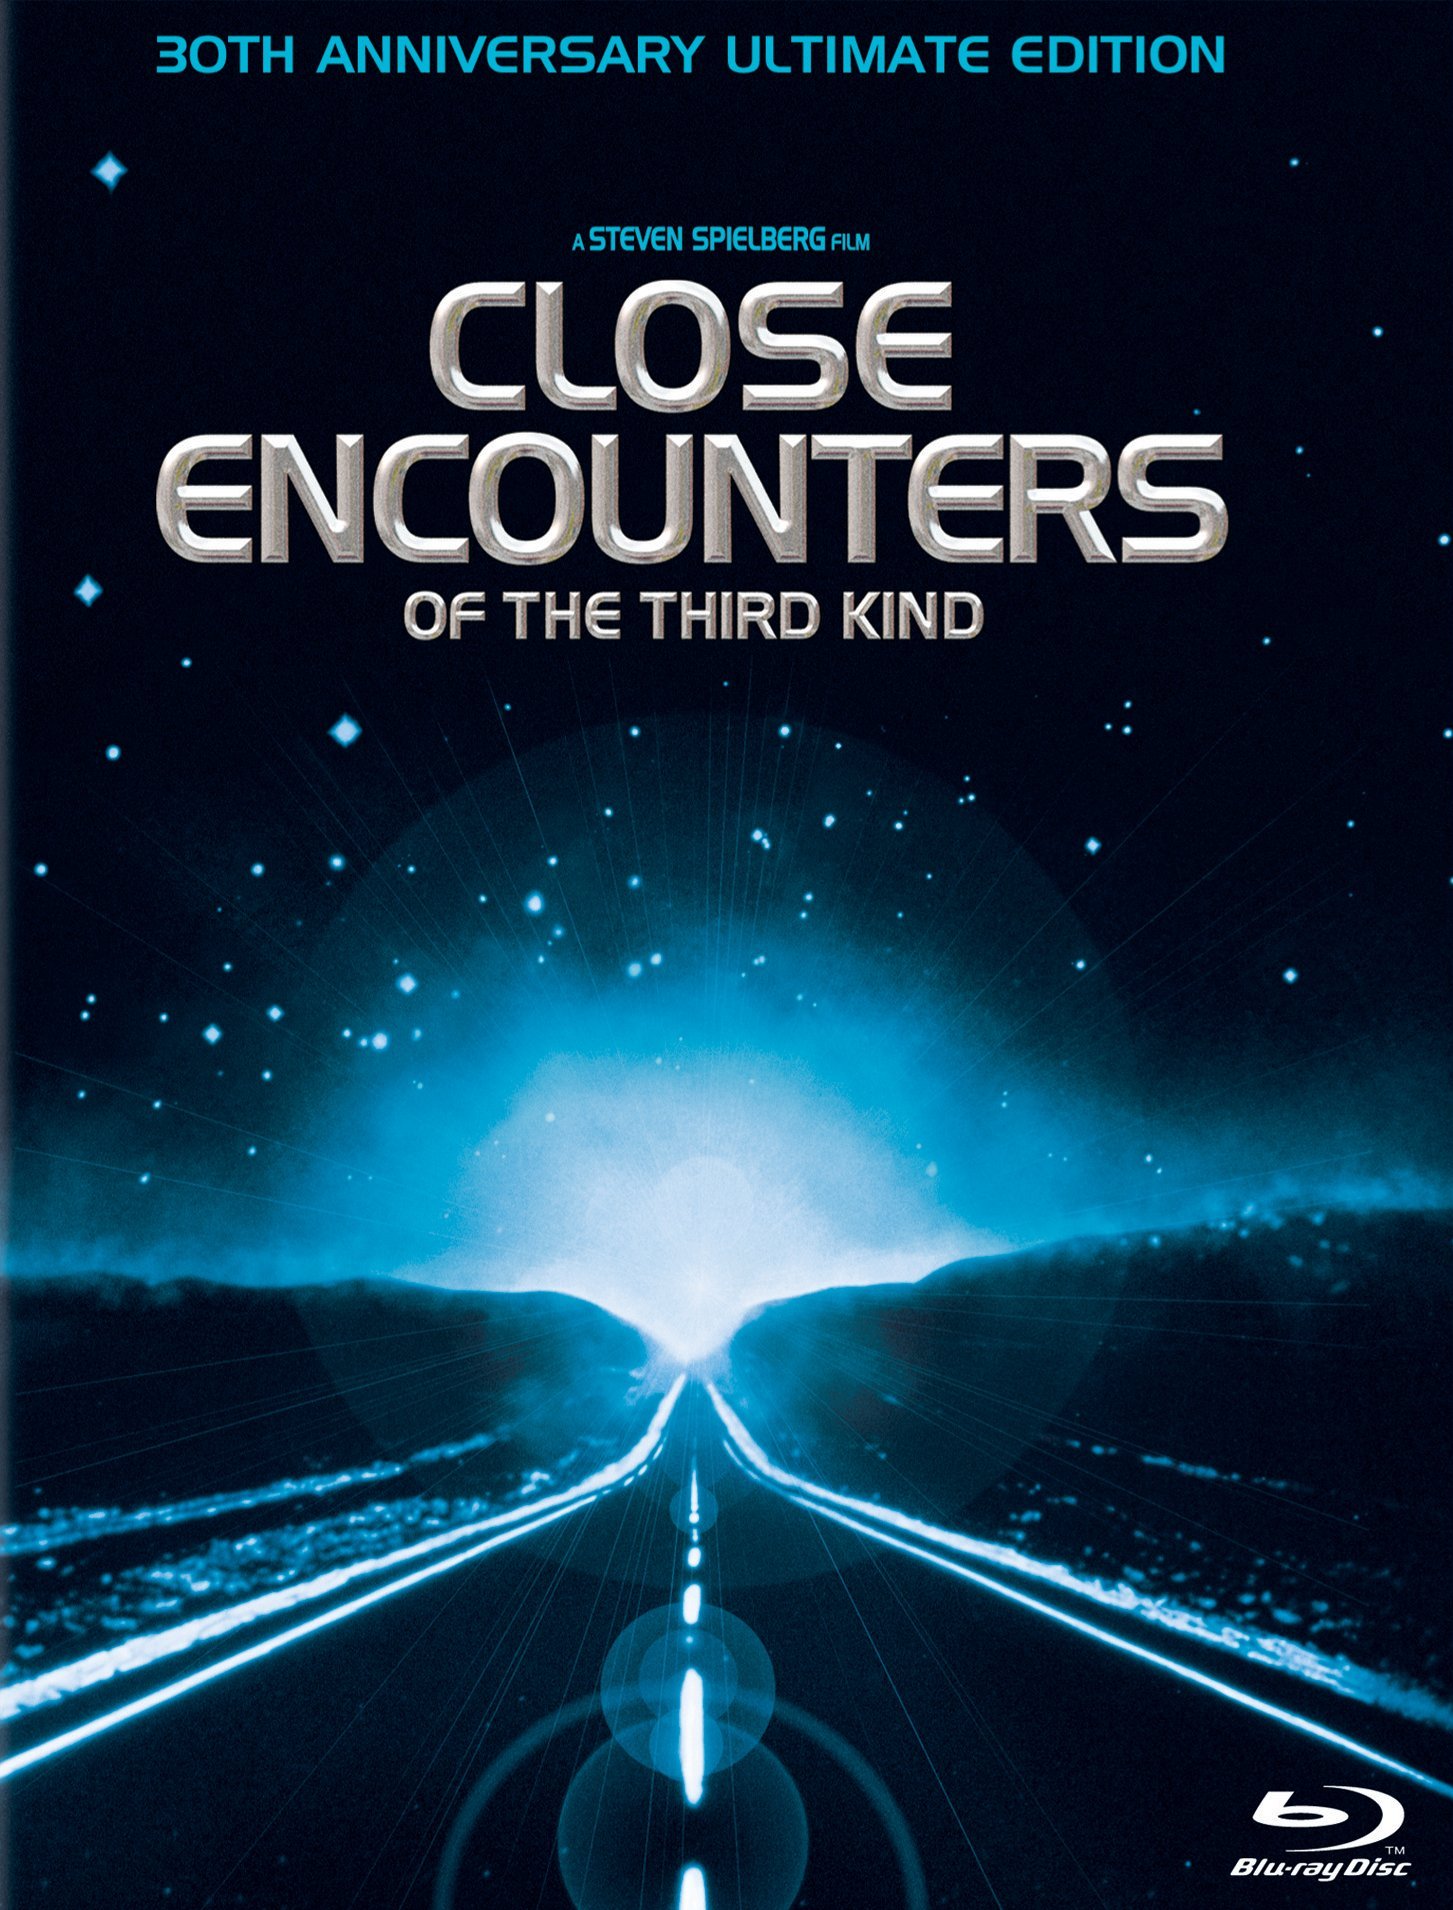 Close Encounters Of The Third Kind Backgrounds, Compatible - PC, Mobile, Gadgets| 1453x1910 px